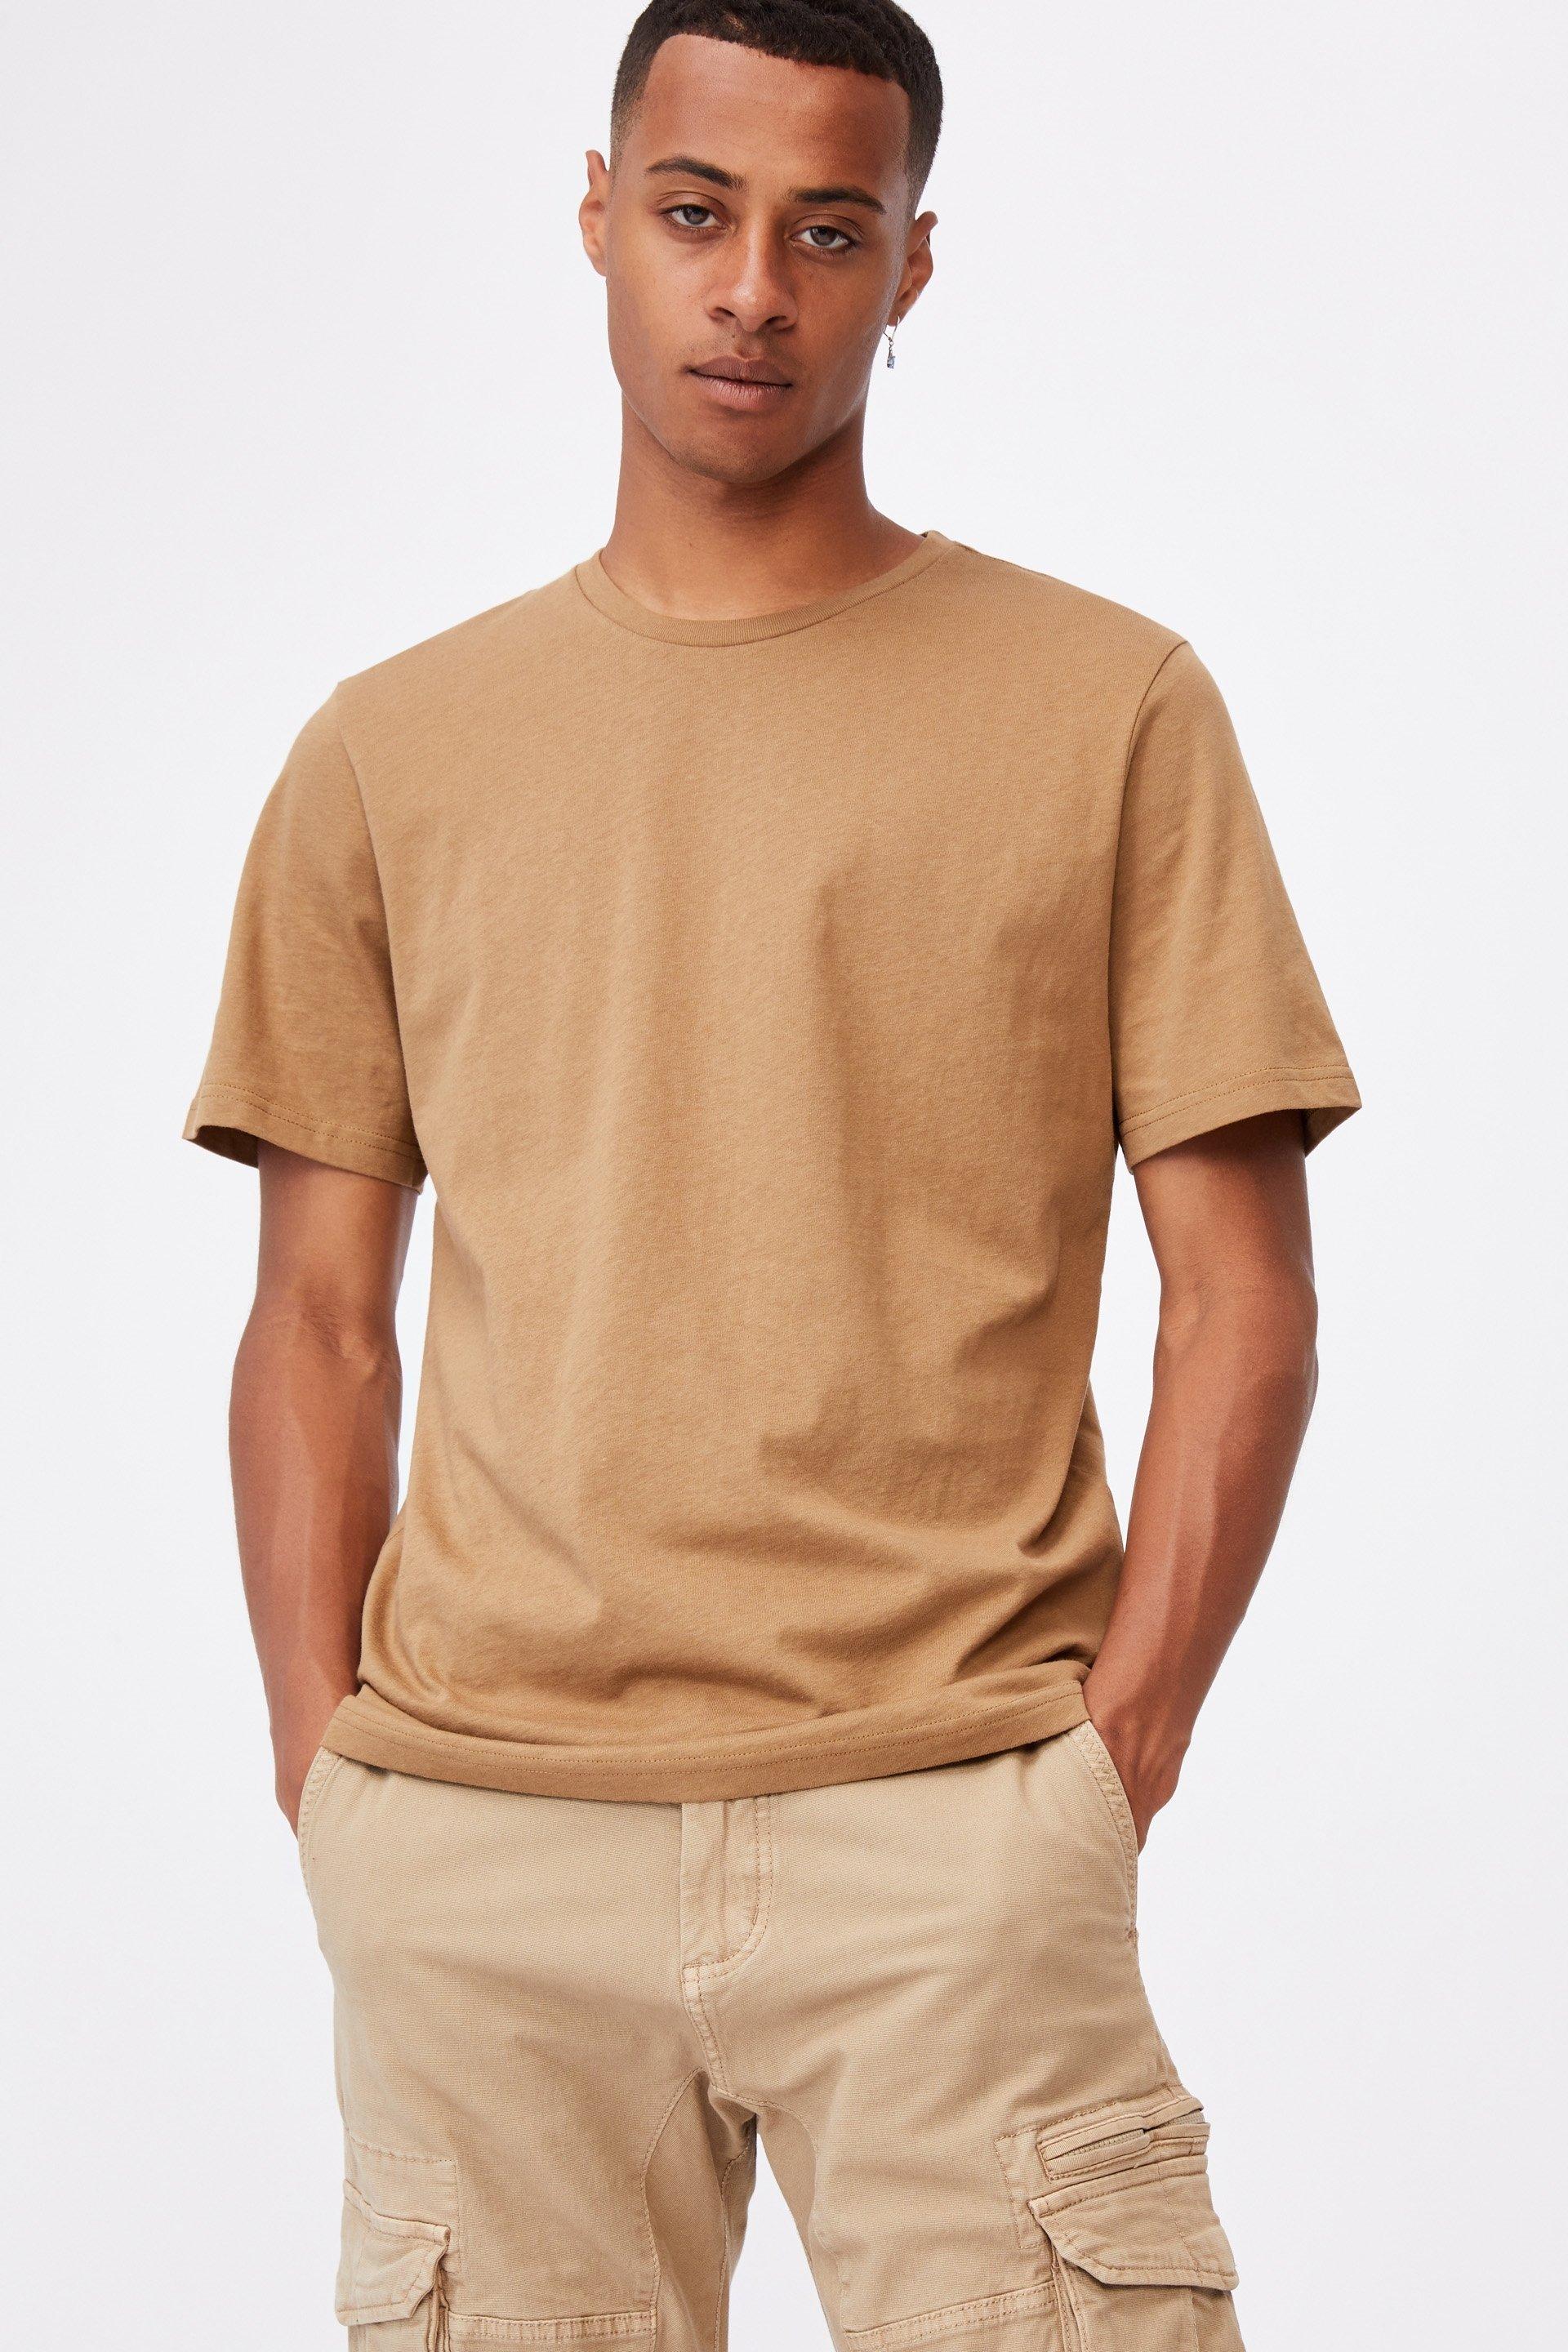 Essential crew t-shirt - aged camel Cotton On T-Shirts & Vests ...